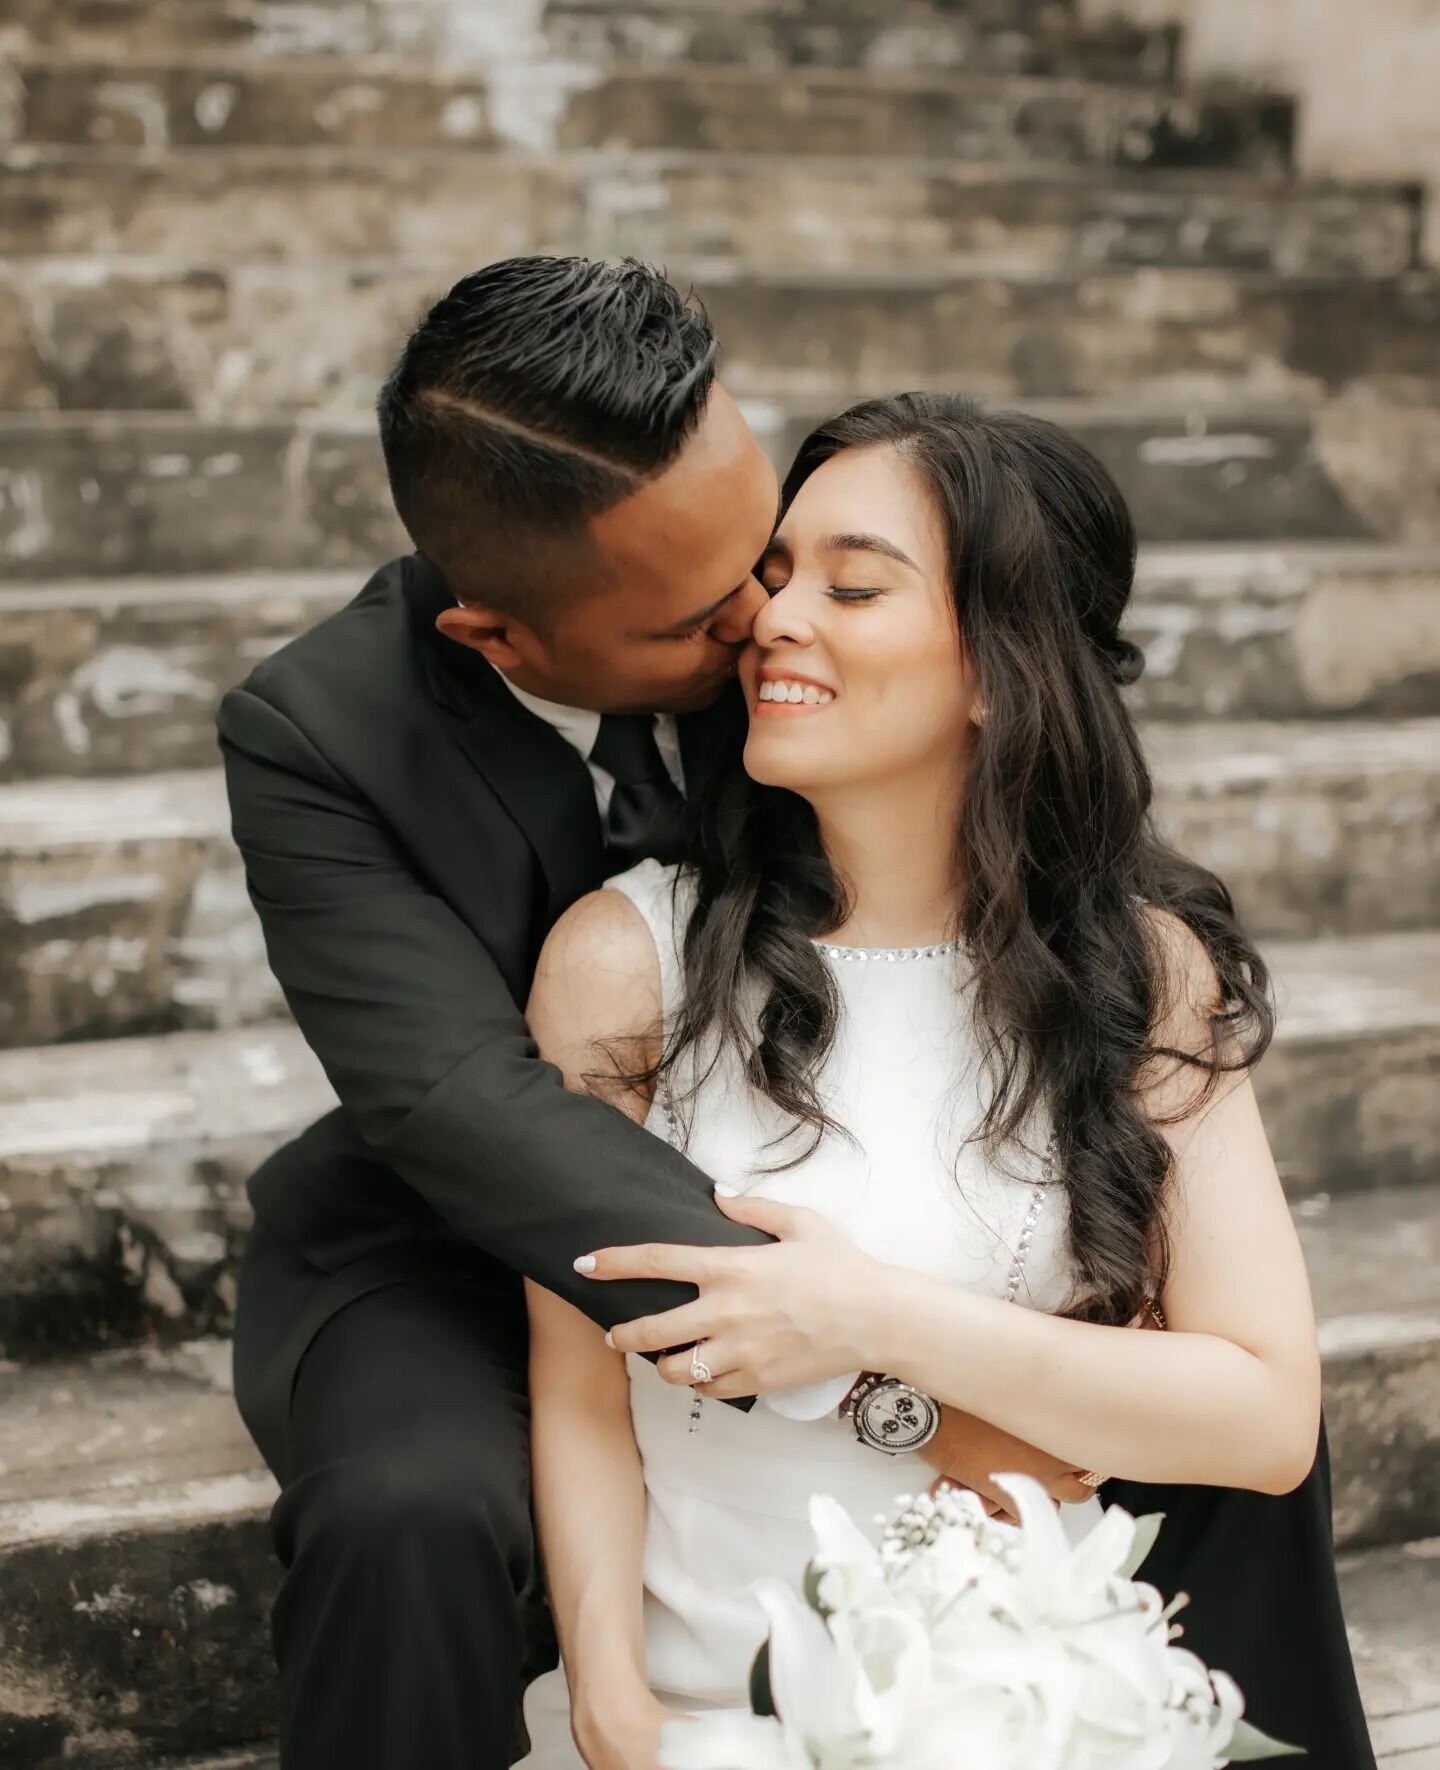 Y + K | You are the world to me and knowing that you will be mine makes it that much sweeter.
&bull;
&bull;
&bull;
&bull;
&bull;
#theweddingscoop #igsg #prewedding #bridestory #sgbrides #beloved #belovedcollective #cmomentdesign #theknot #love #bride